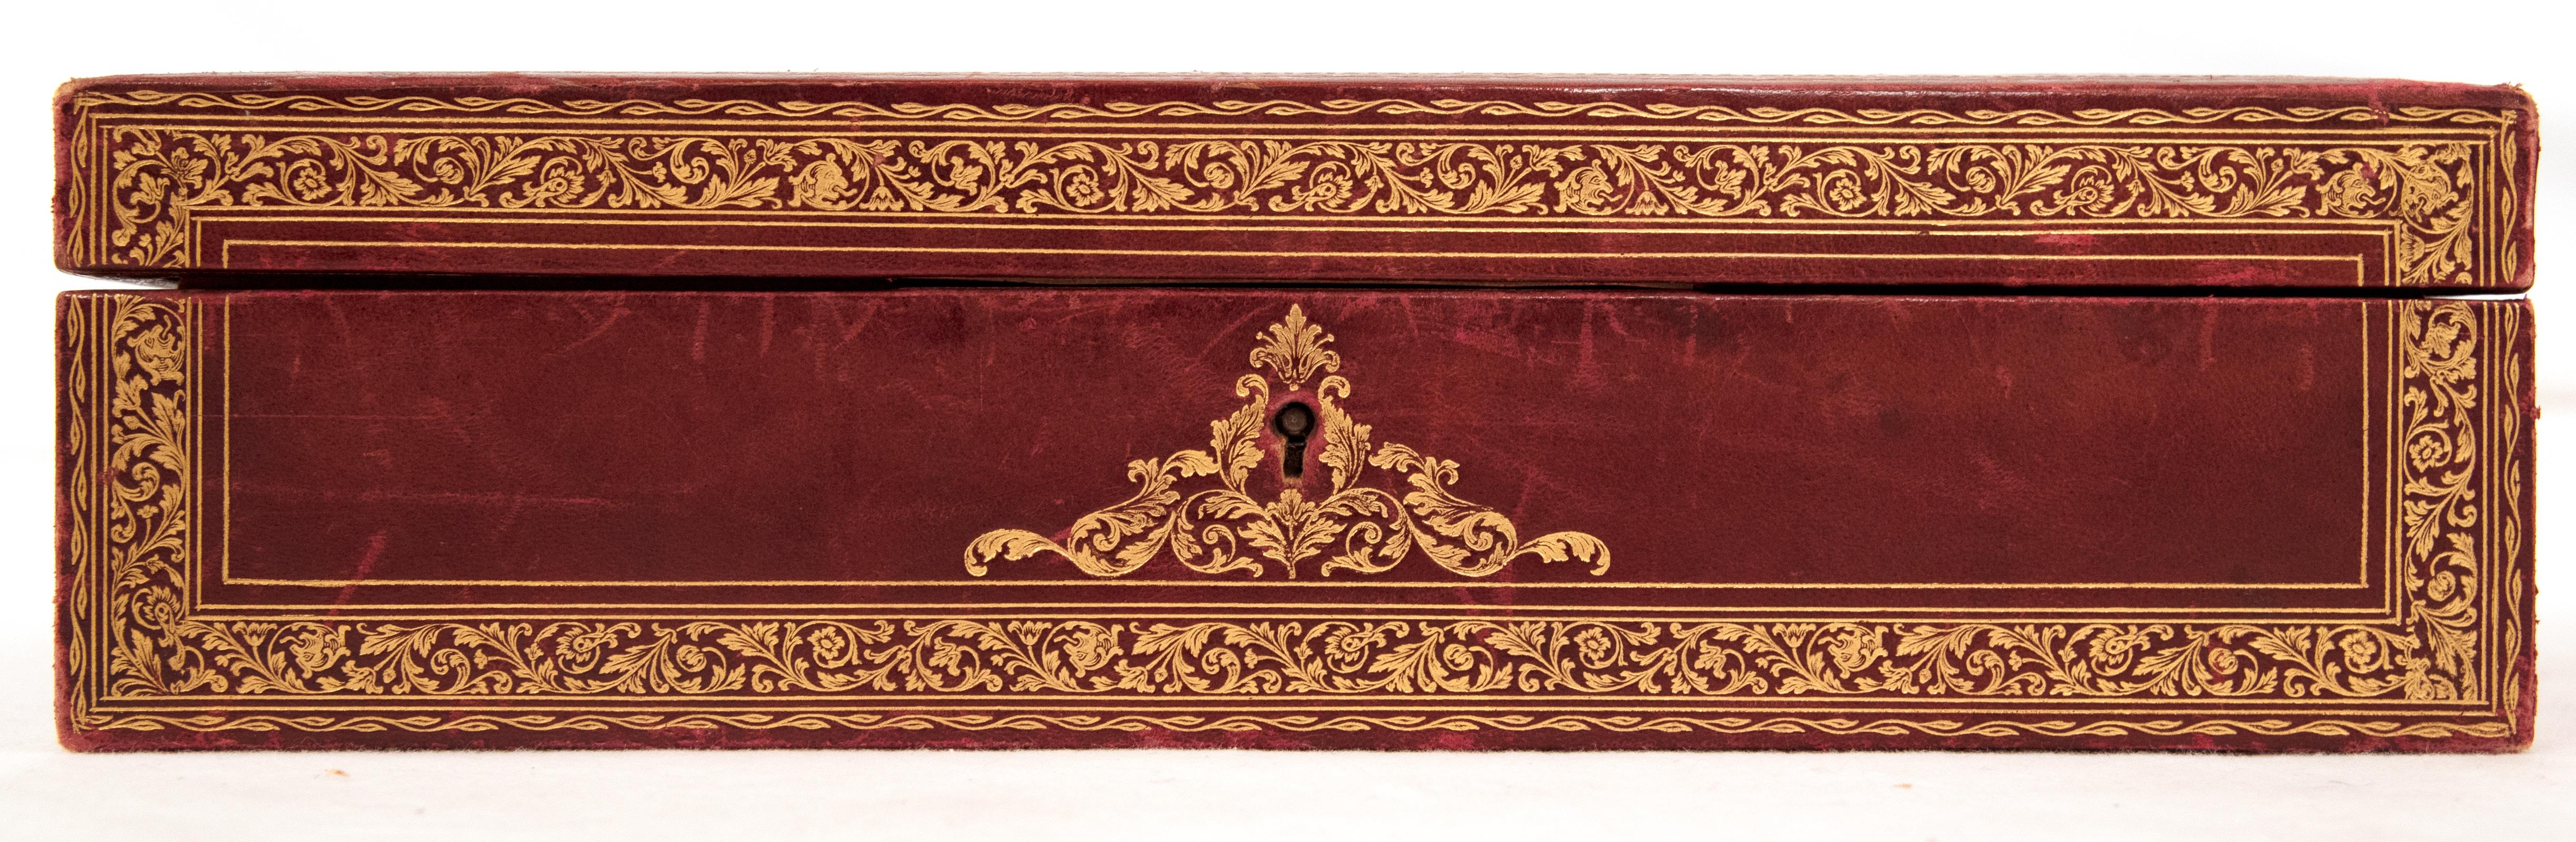 19th Century Italian Stamped and Gilt Red Leather Box with Suede Interior In Fair Condition For Sale In Salt Lake City, UT